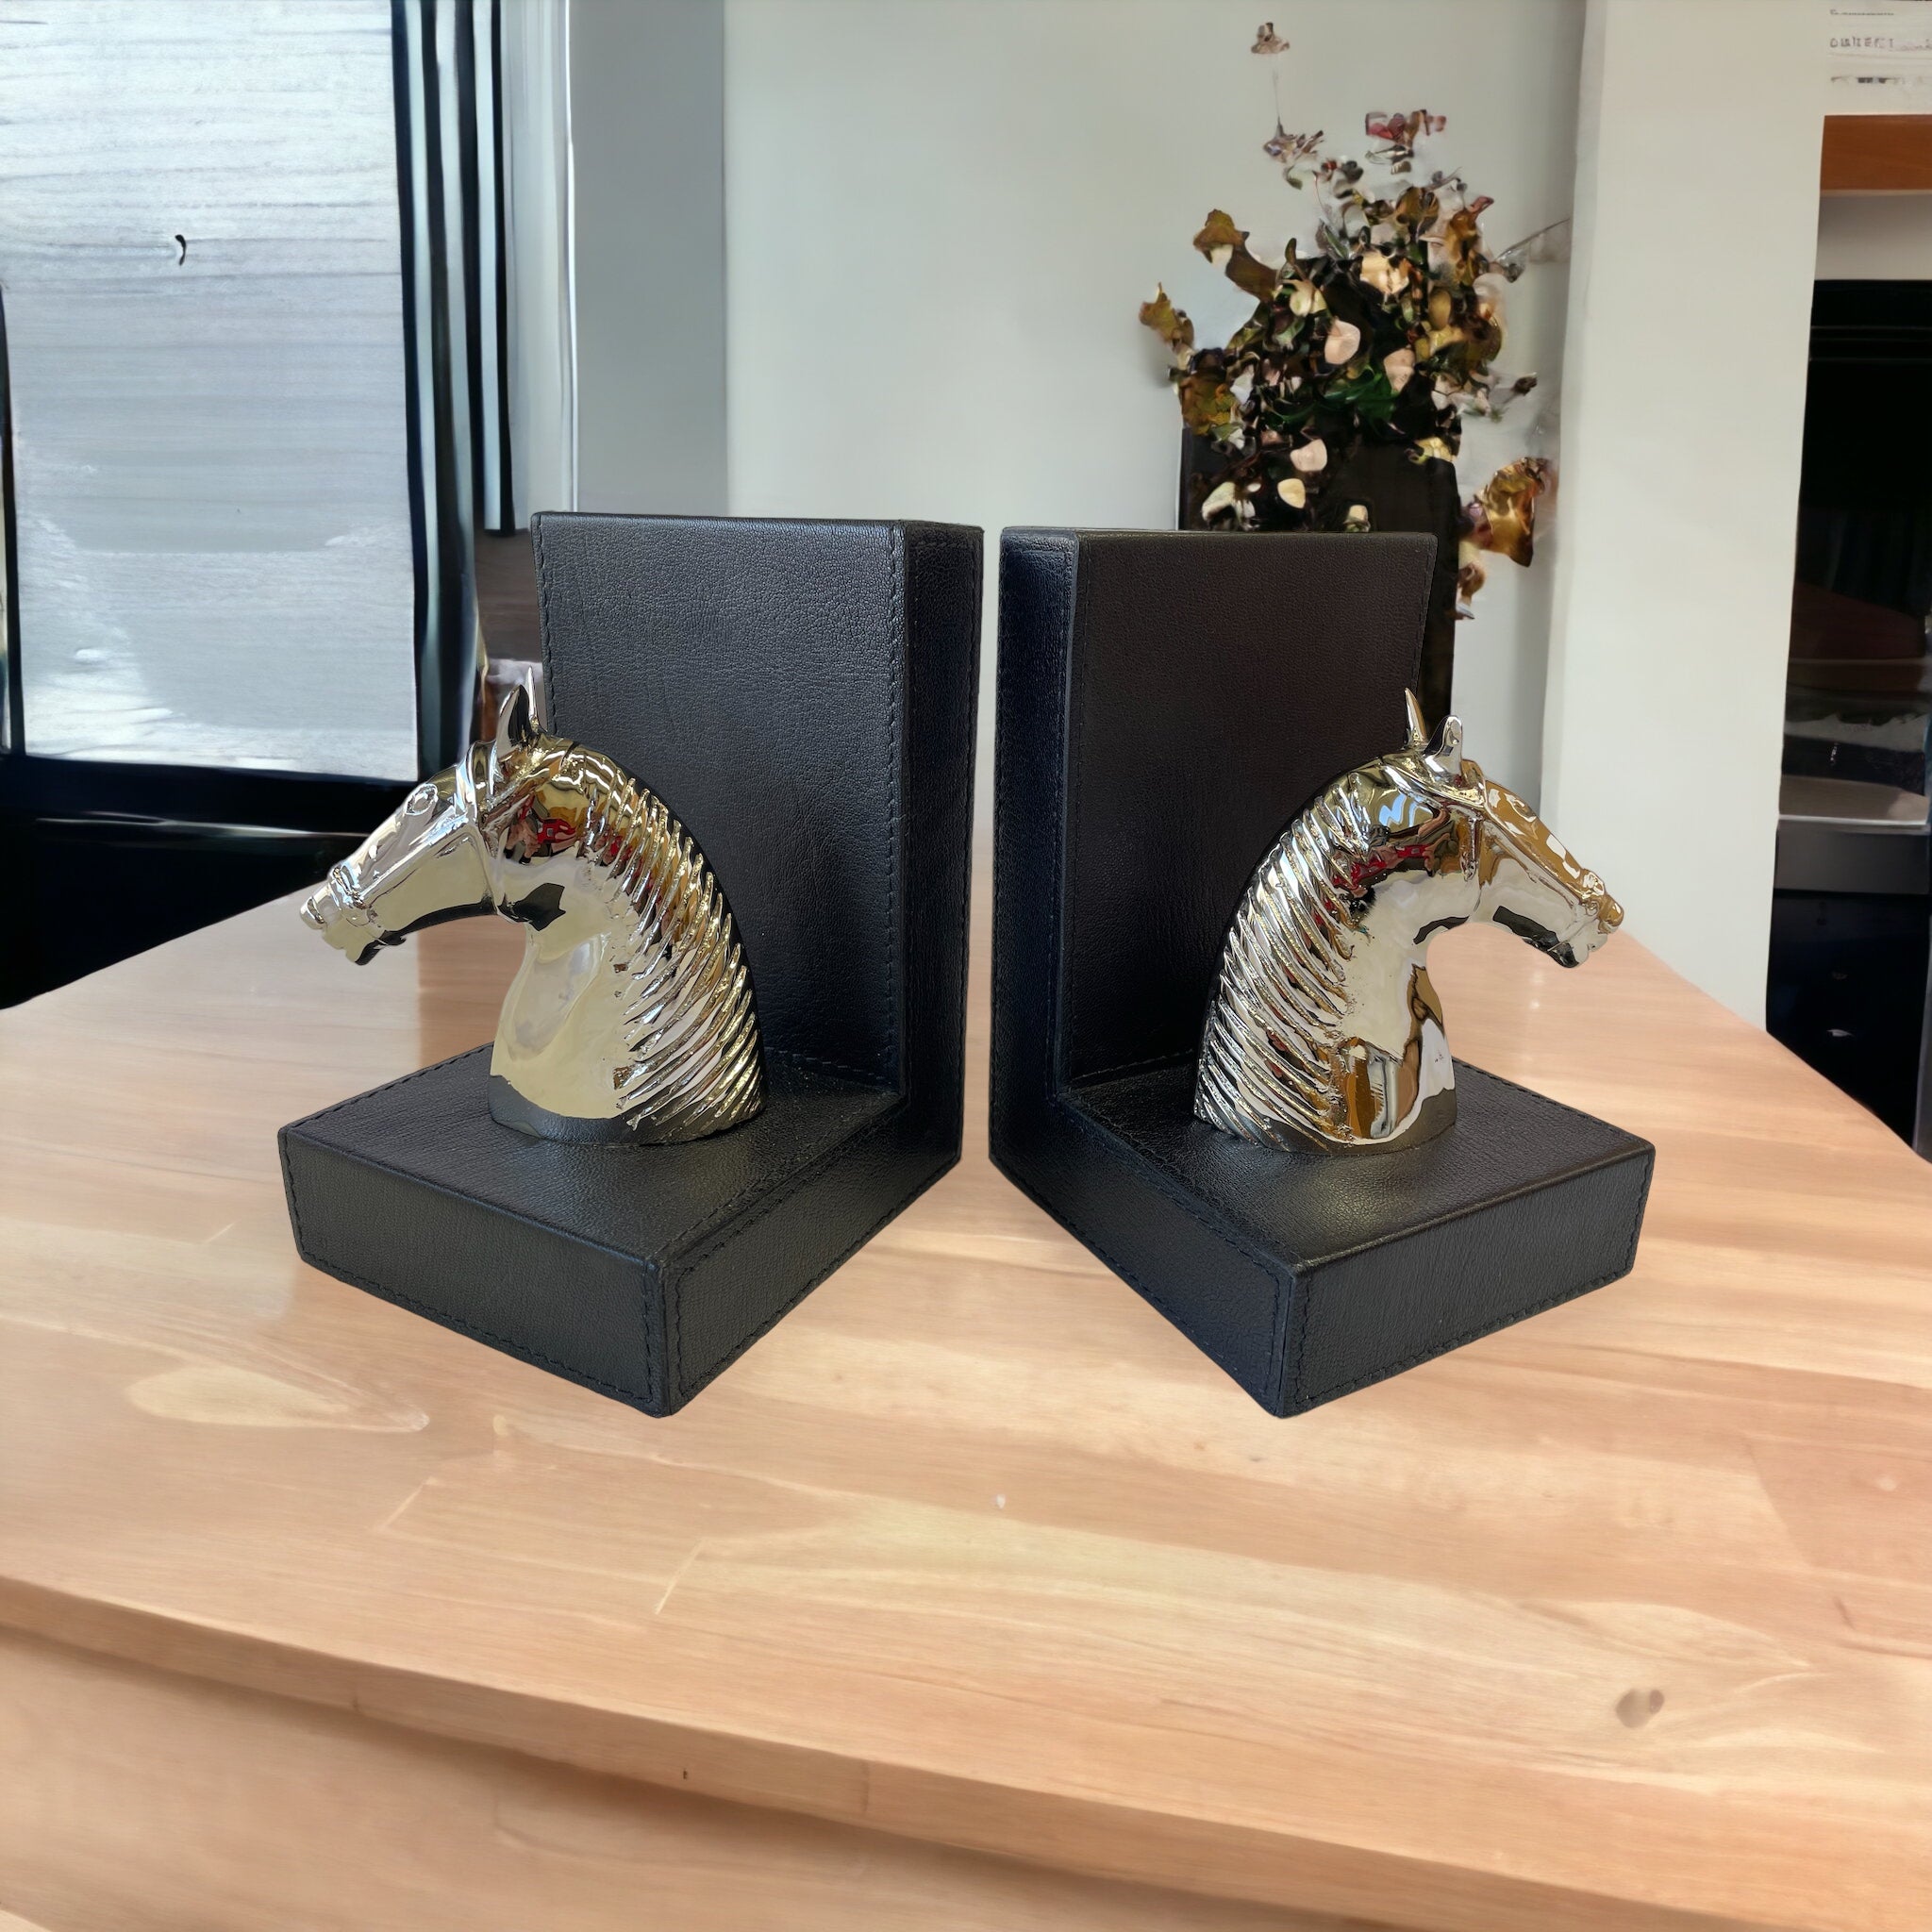 Set of 2 Horse Figurine Bookends - Black Leather - Notbrand